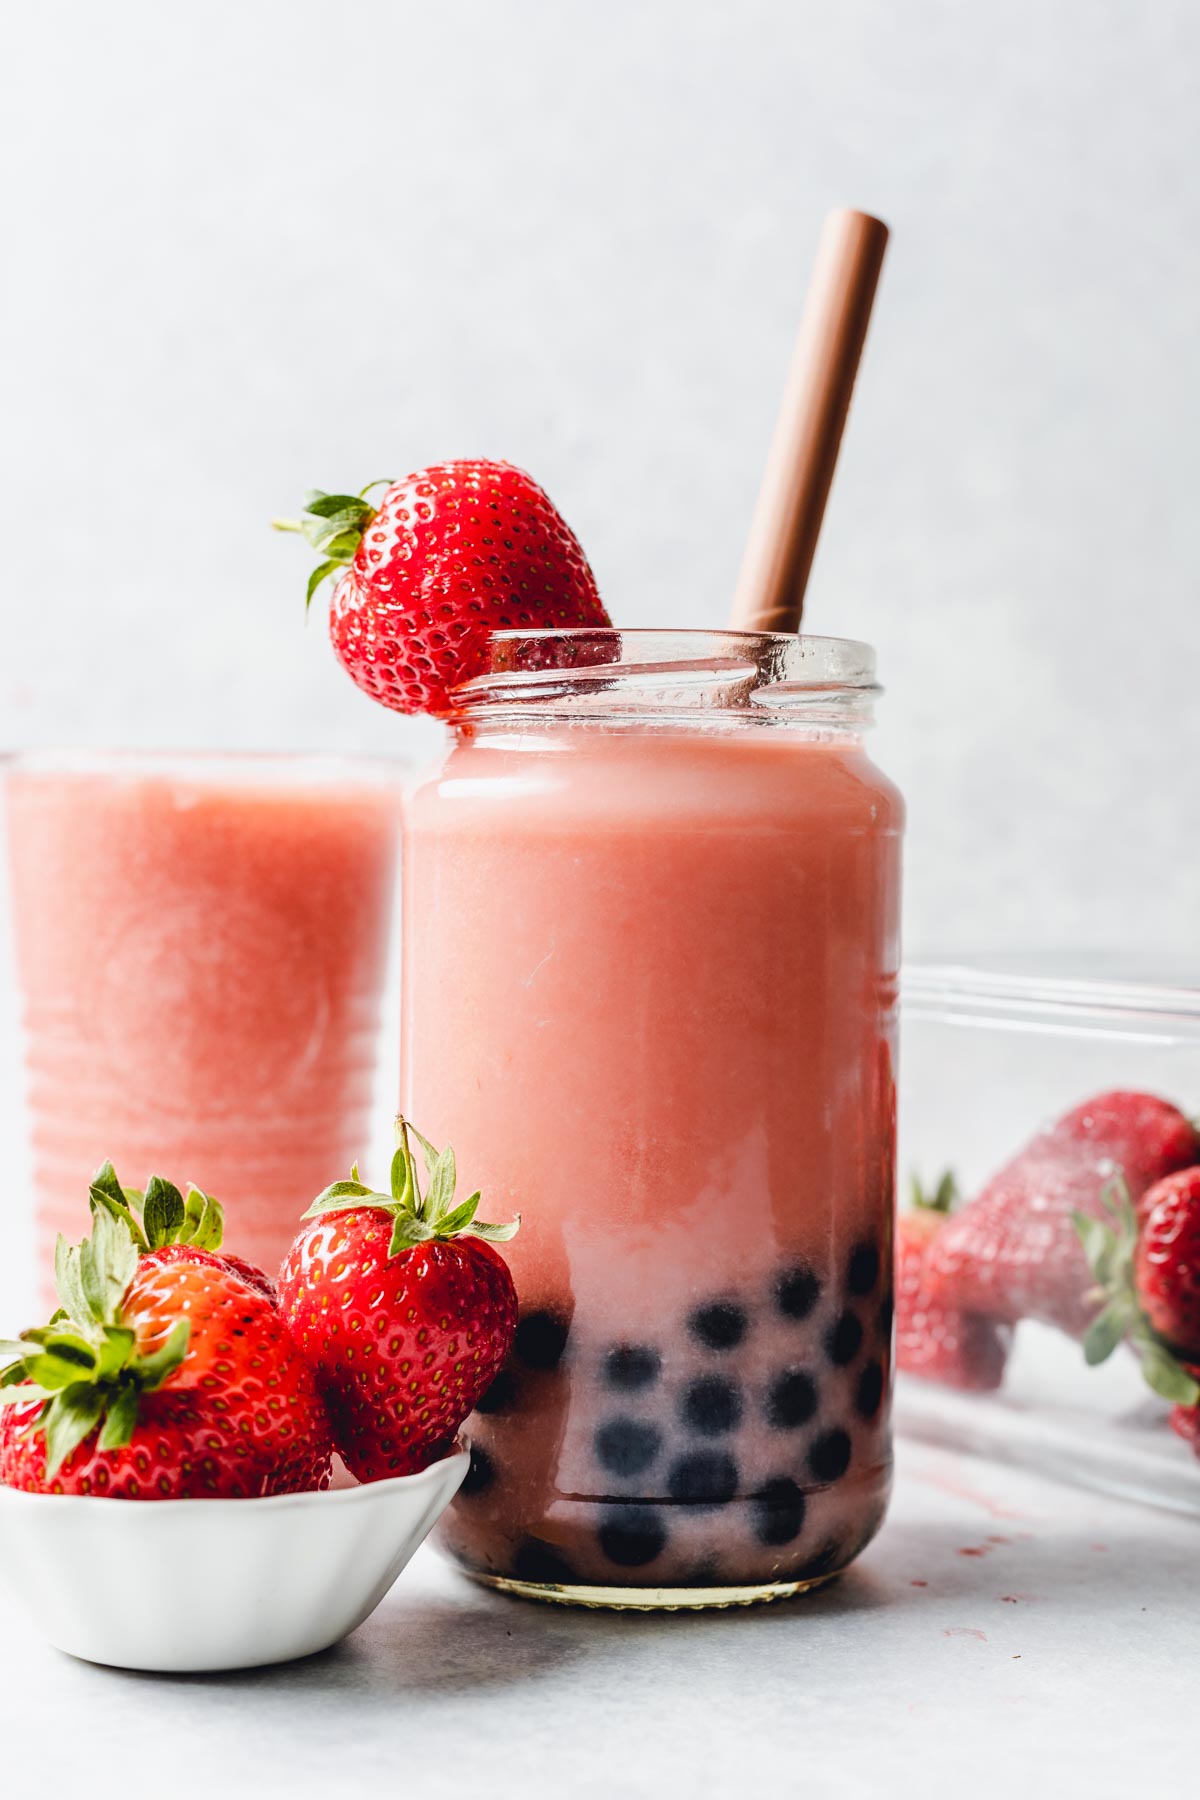 A glass filled with a pink drink with boba pearls at the bottom and strawberries around it.